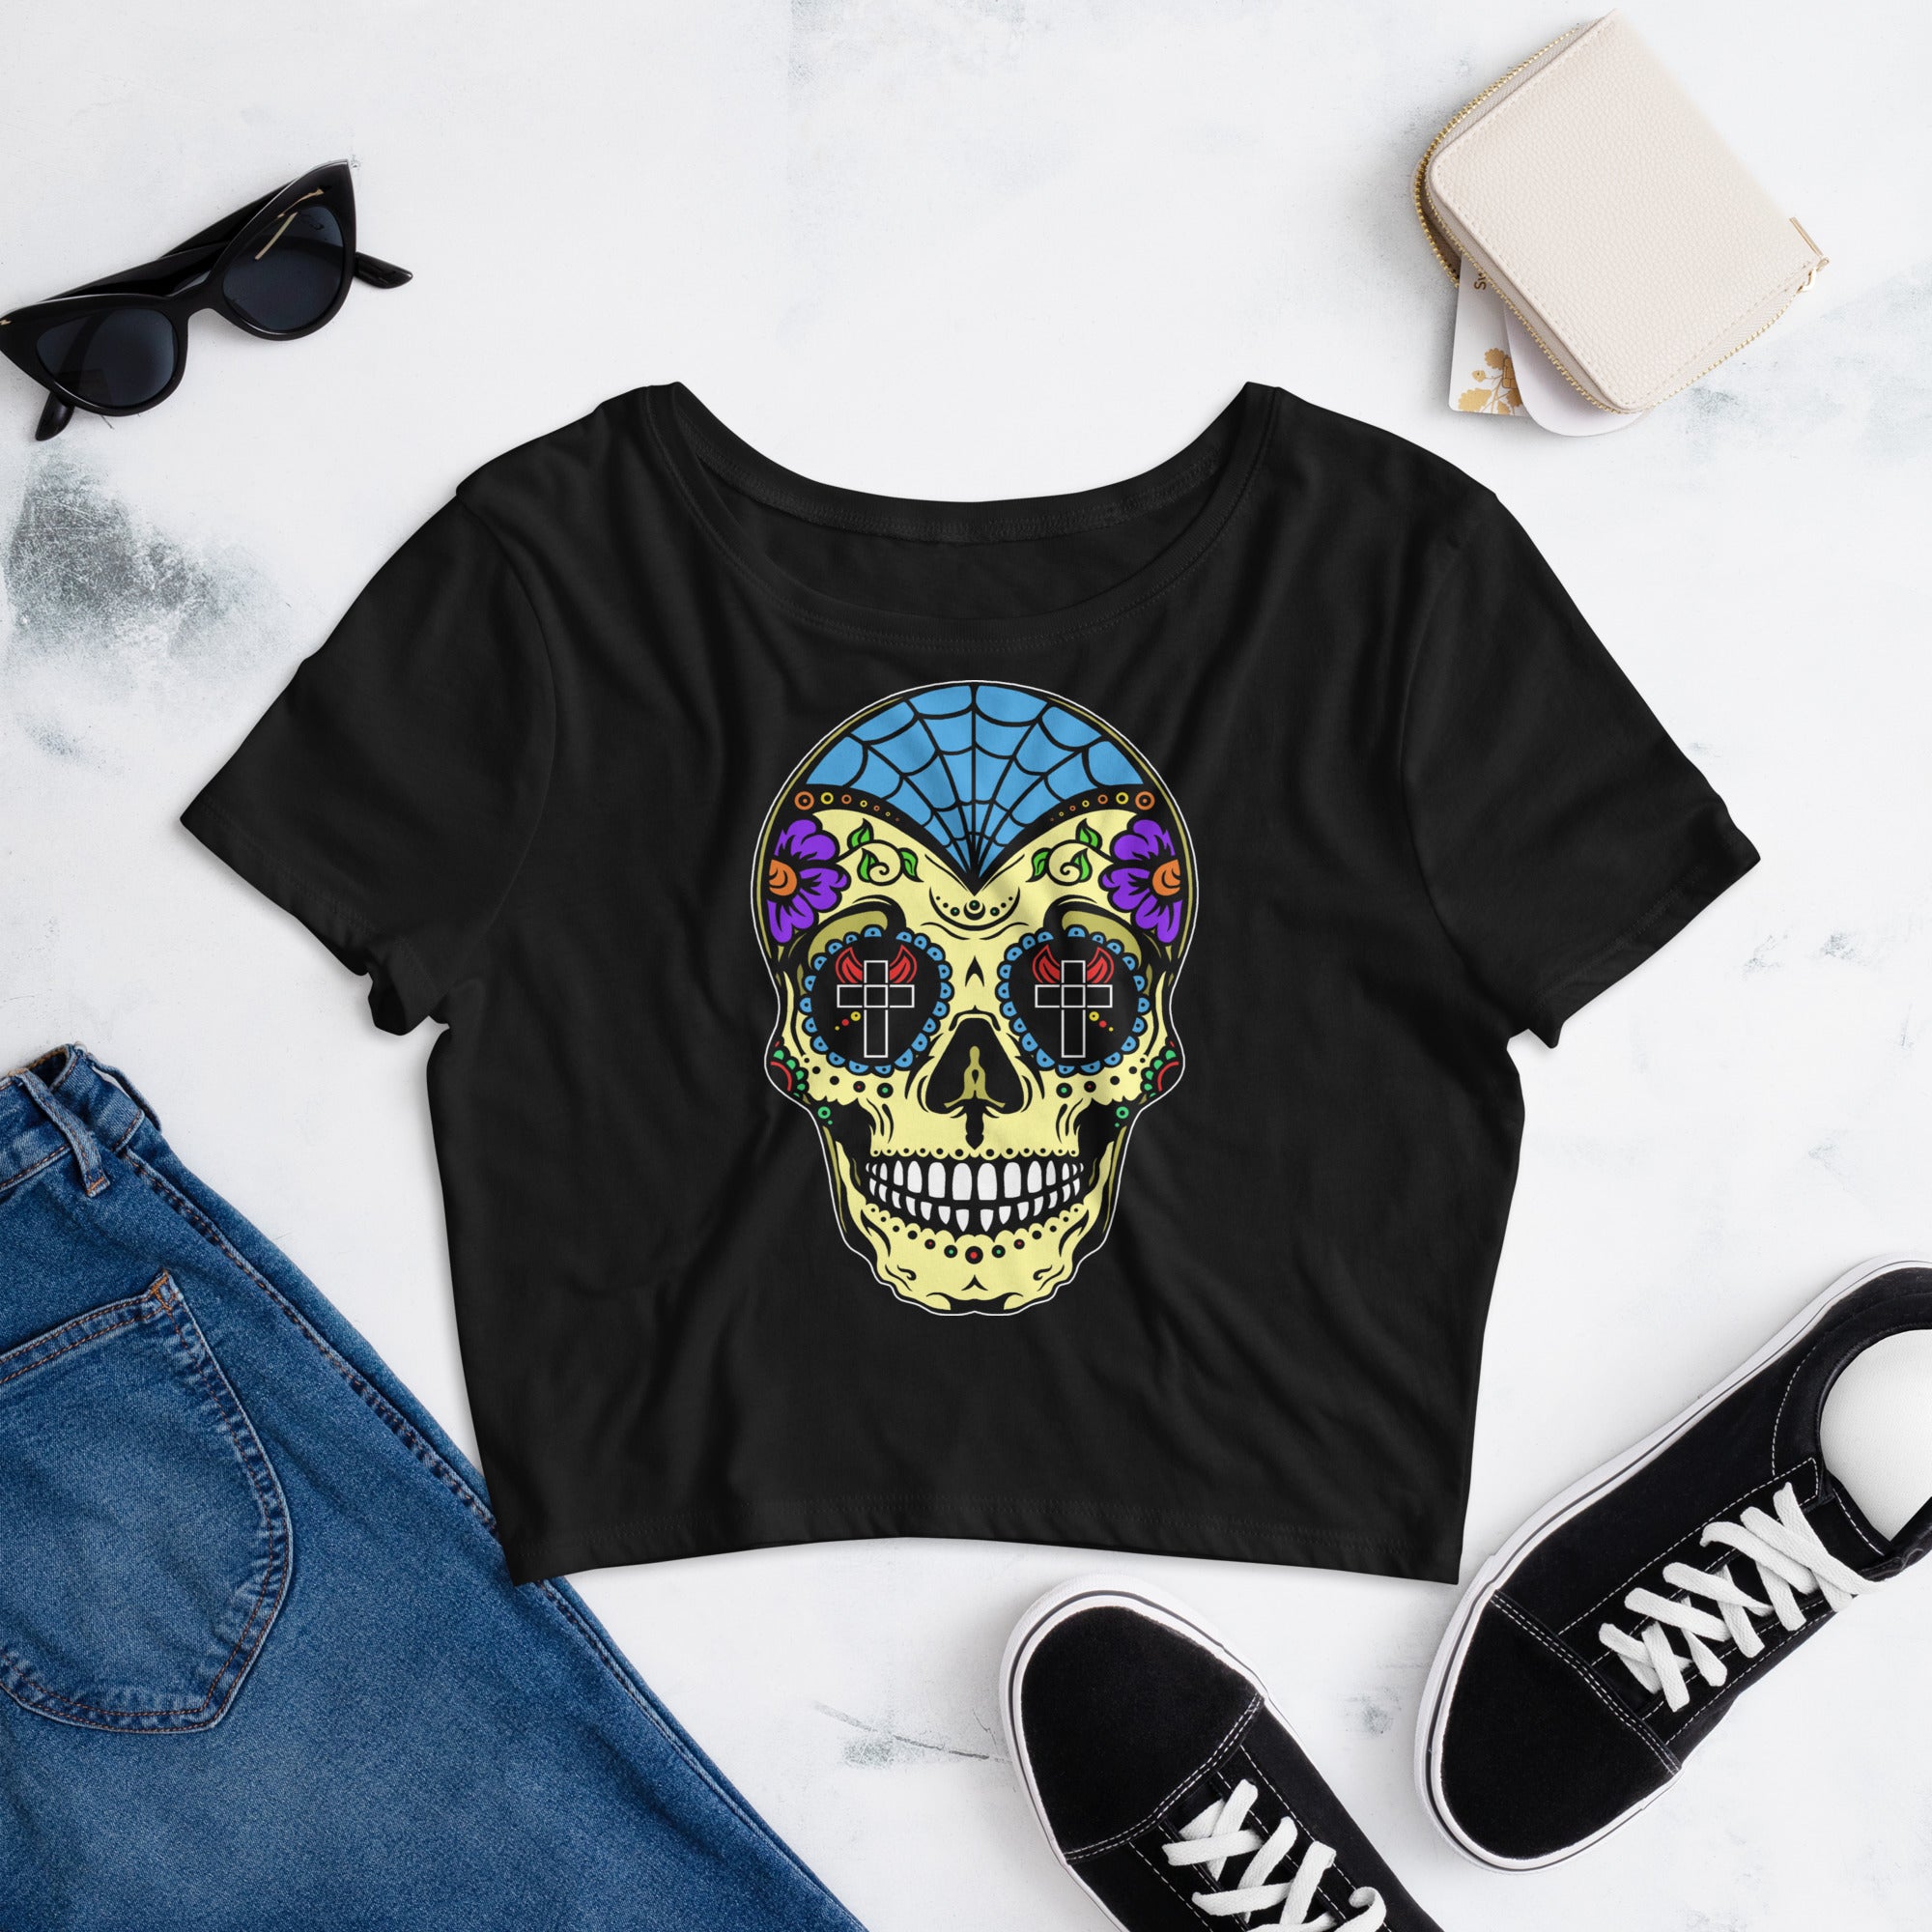 Colorful Sugar Skull Day of the Dead Halloween Women’s Crop Tee - Edge of Life Designs